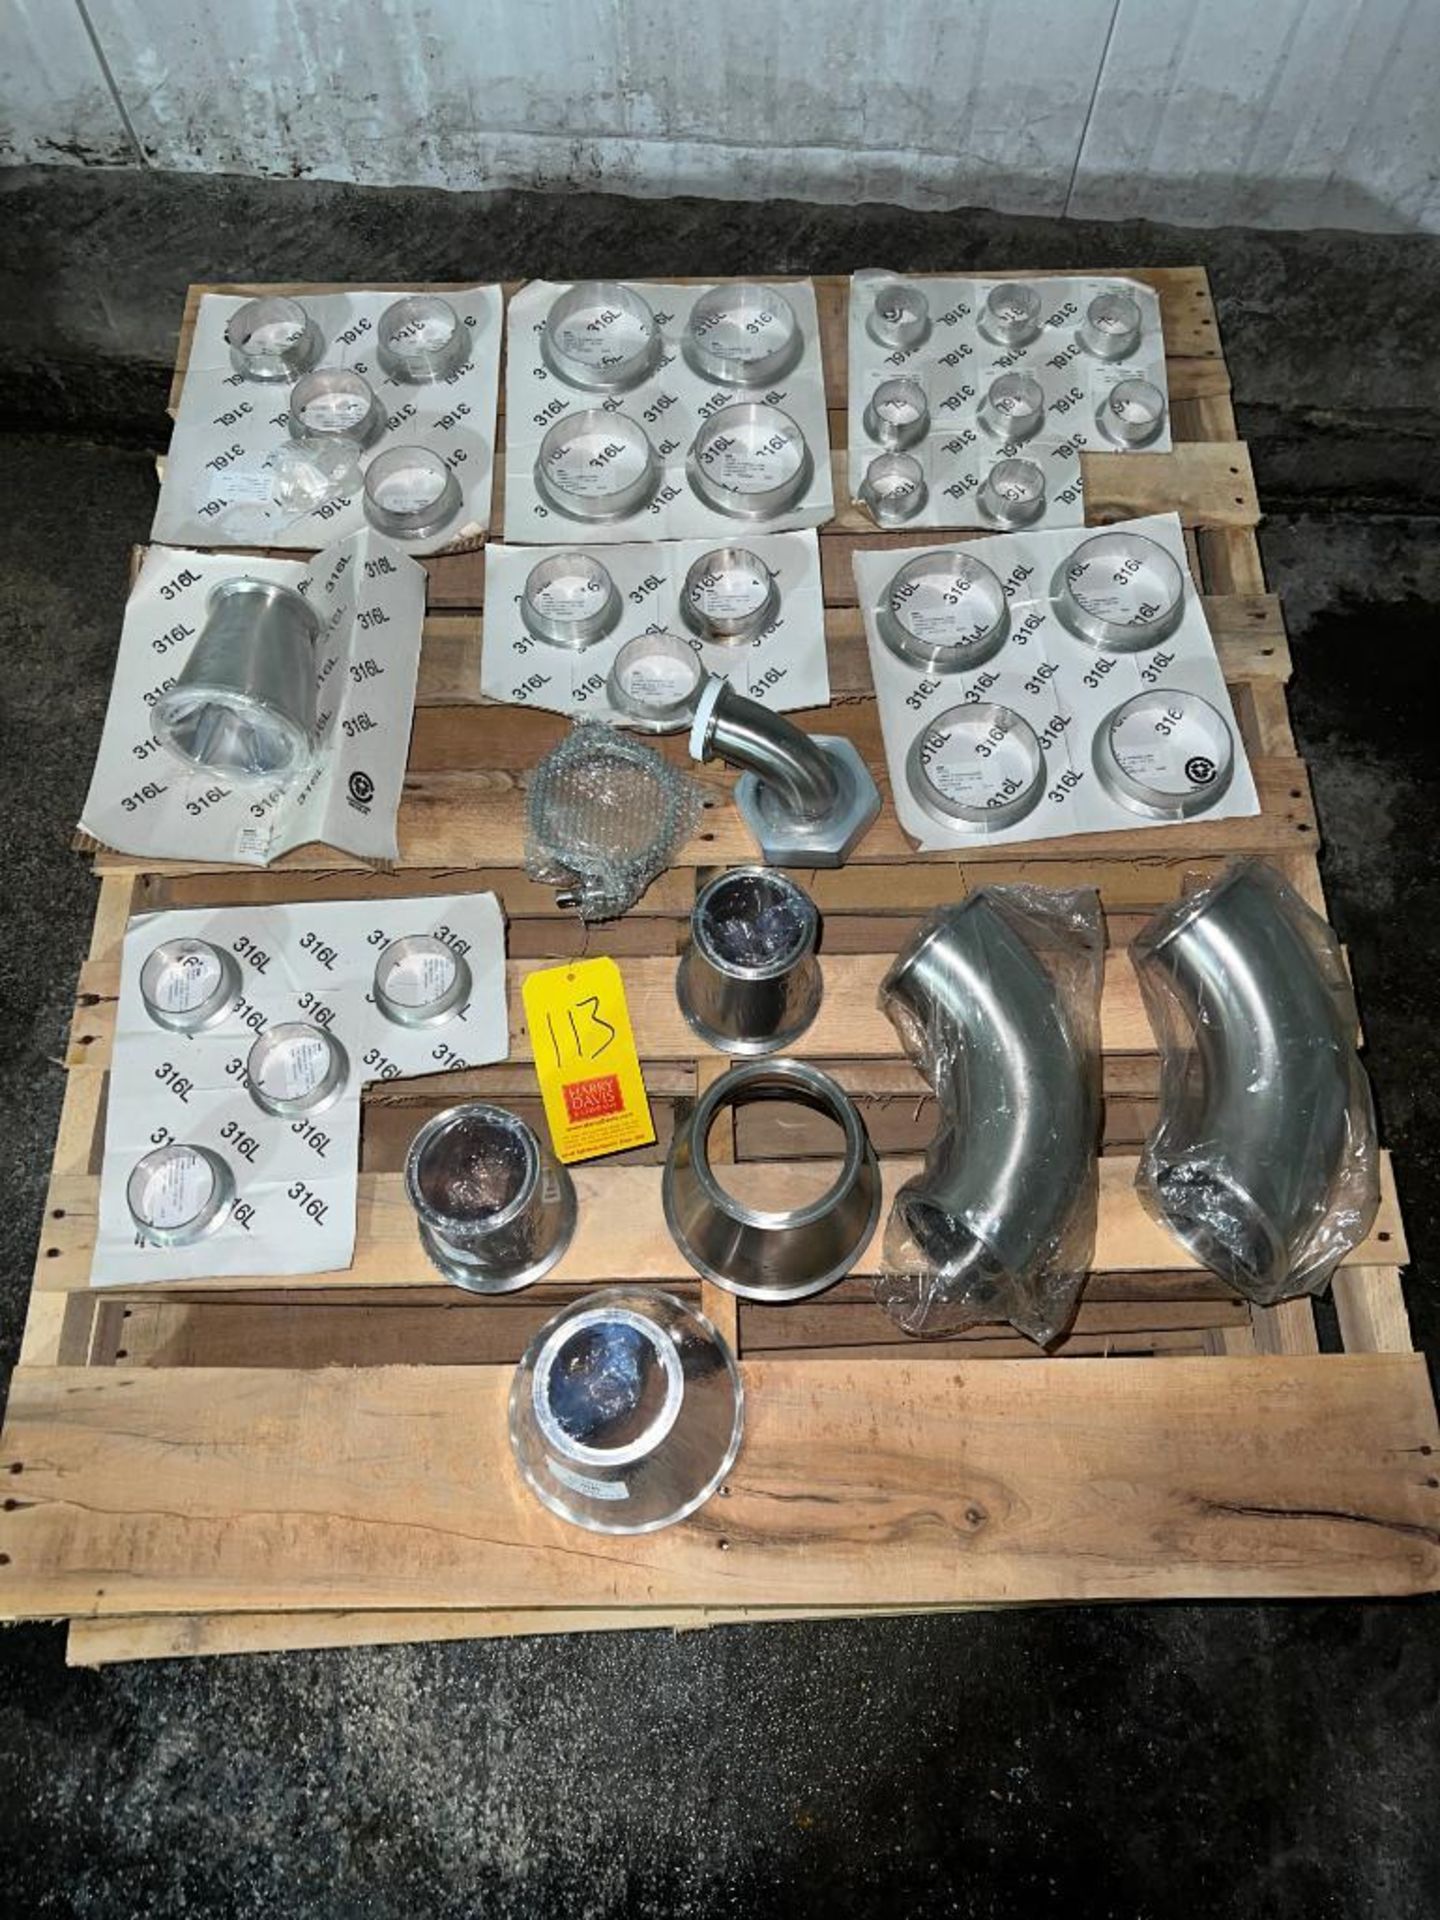 NEW S/S Flanges, Reducers, Elbows, 6" Clamp - Image 4 of 4